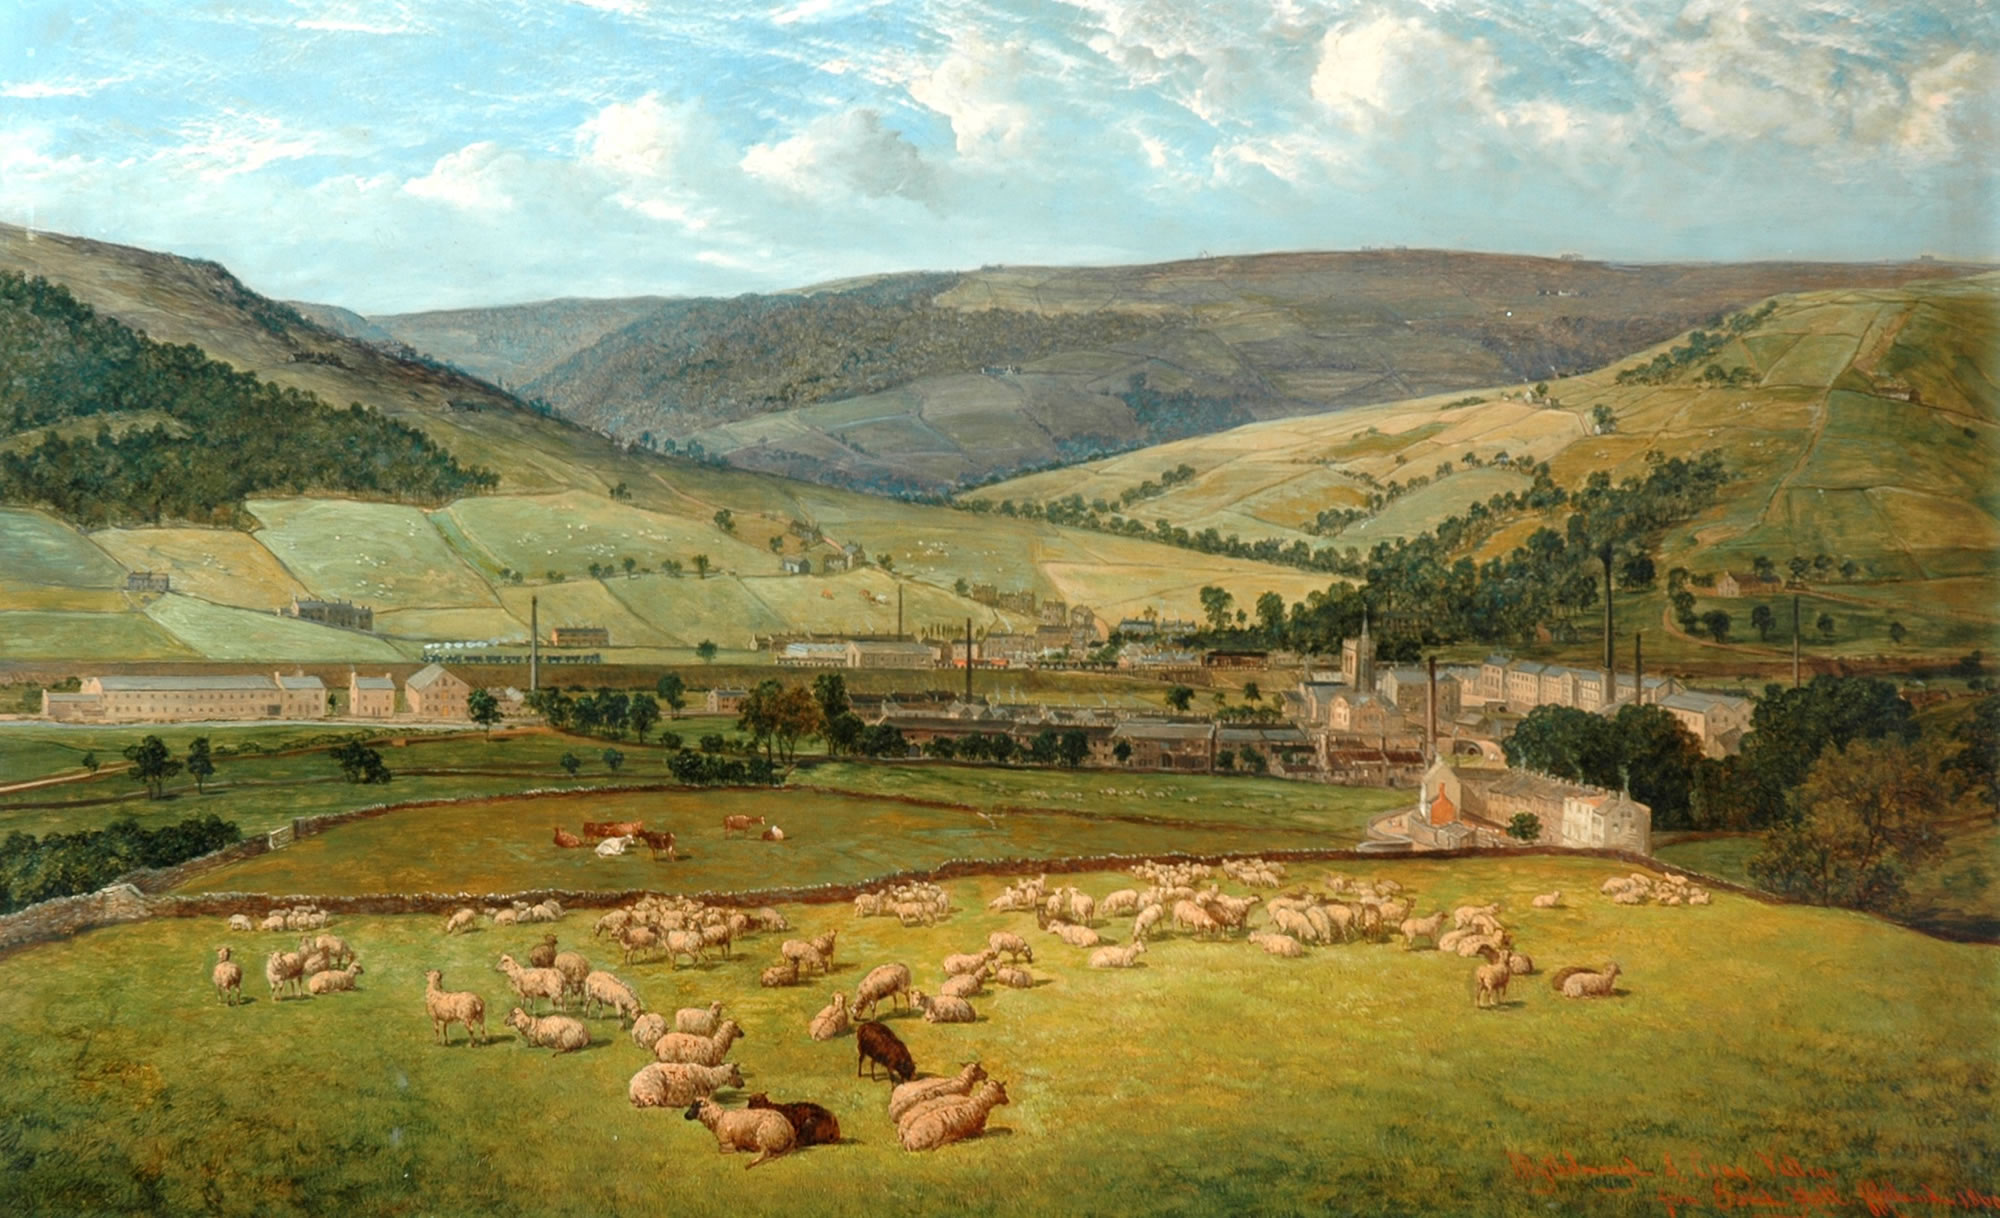 Image name calderdale mytholmroyd amd cragg valley from ewood hall john holland 1869 the 17 image from the post We are West Yorkshire in Yorkshire.com.